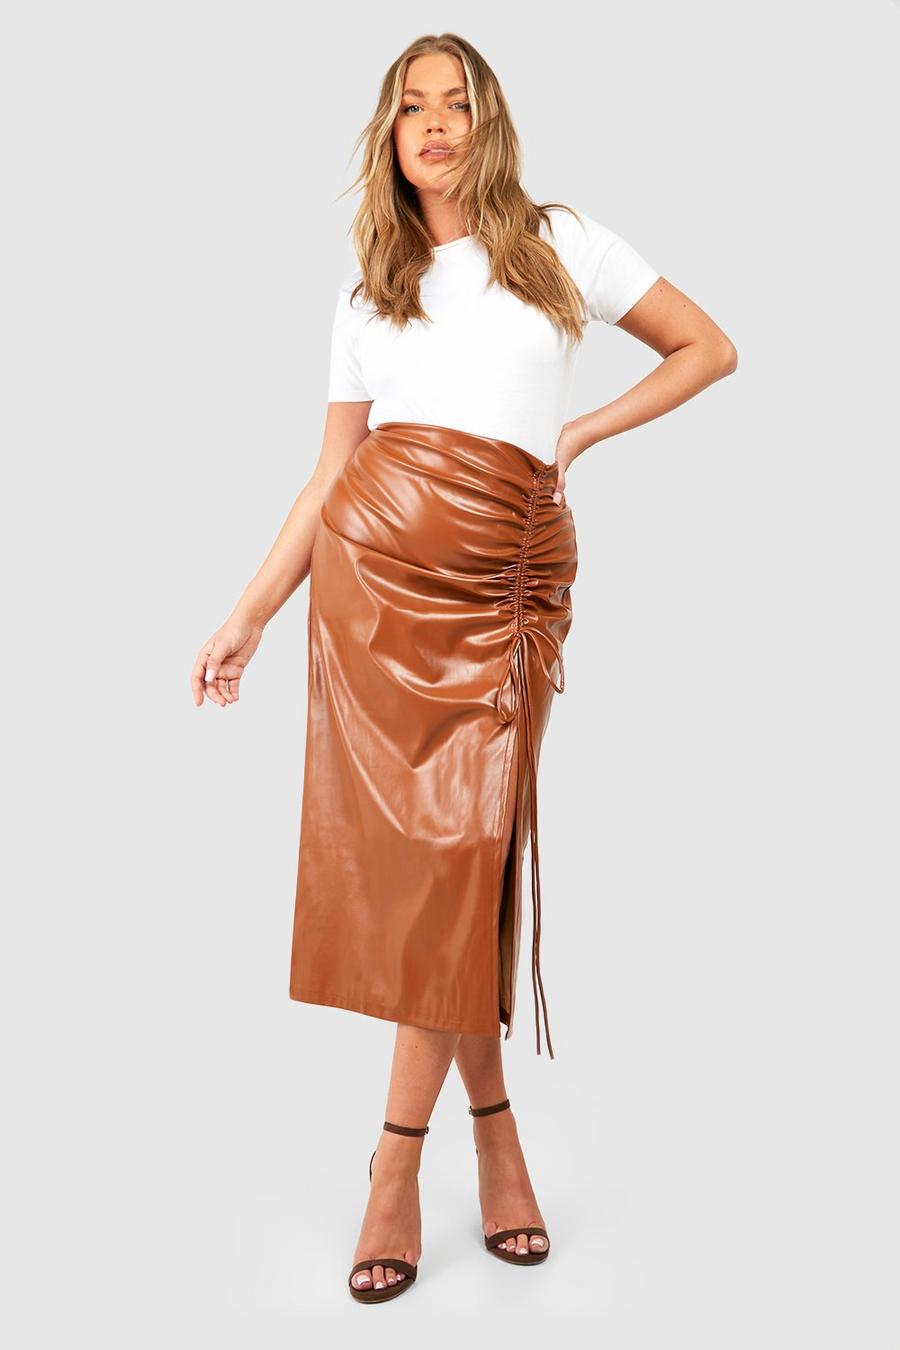 Gonna longuette Plus Size in PU con ruches e spacco frontale, Chocolate image number 1